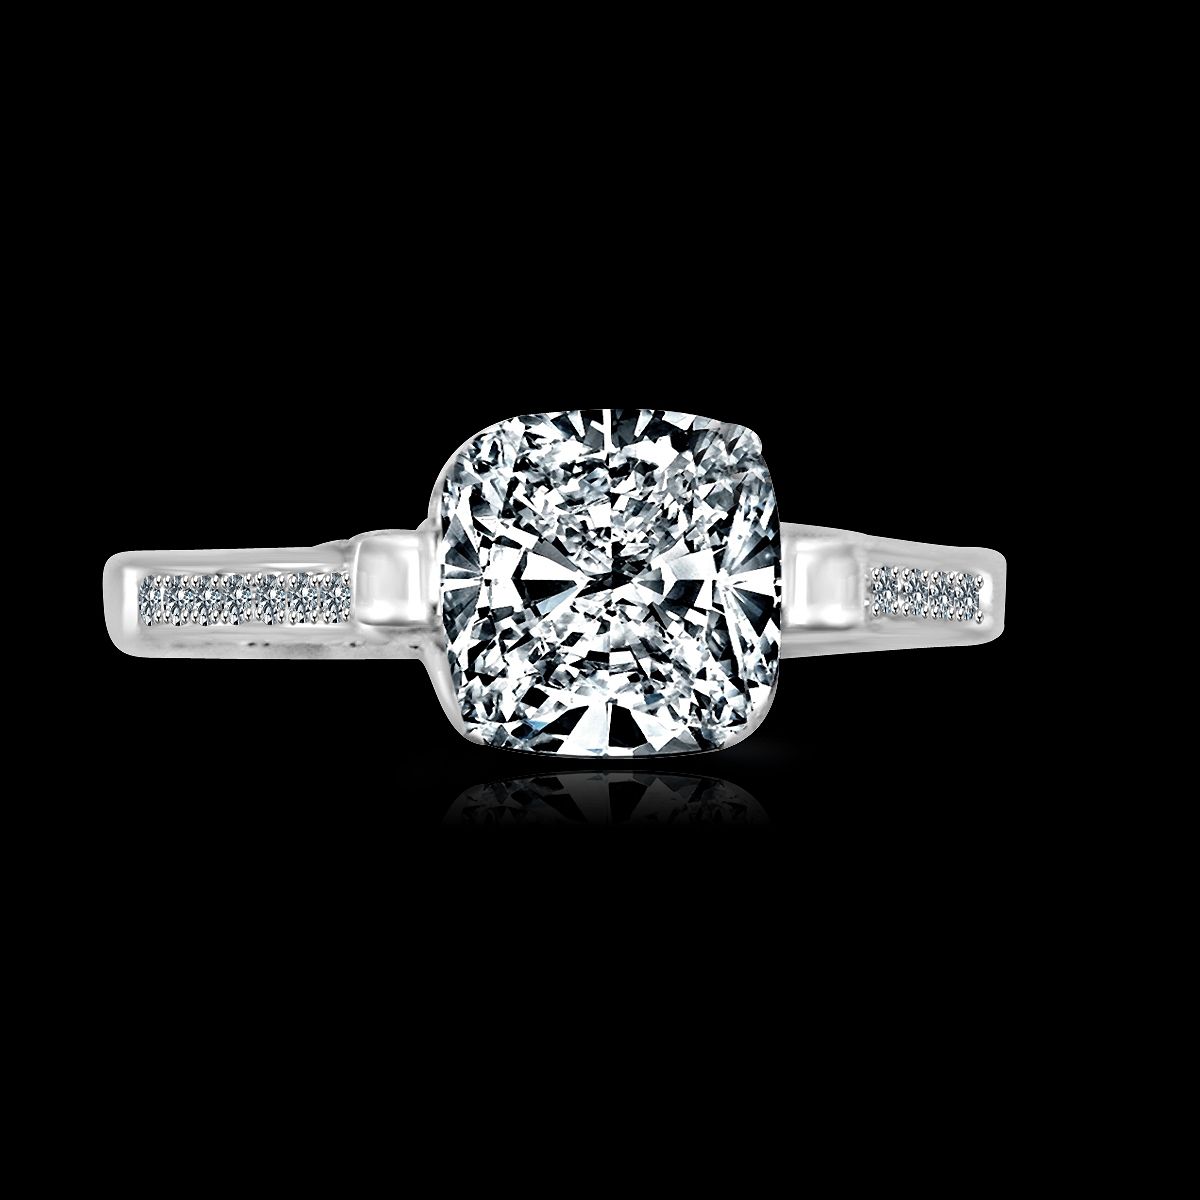 1.5CT intensely Radiant Cushion square Diamond Veneer Cubic zirconia Tension style Set in Sterling Silver Wedding/Engagement Ring. 635R71495